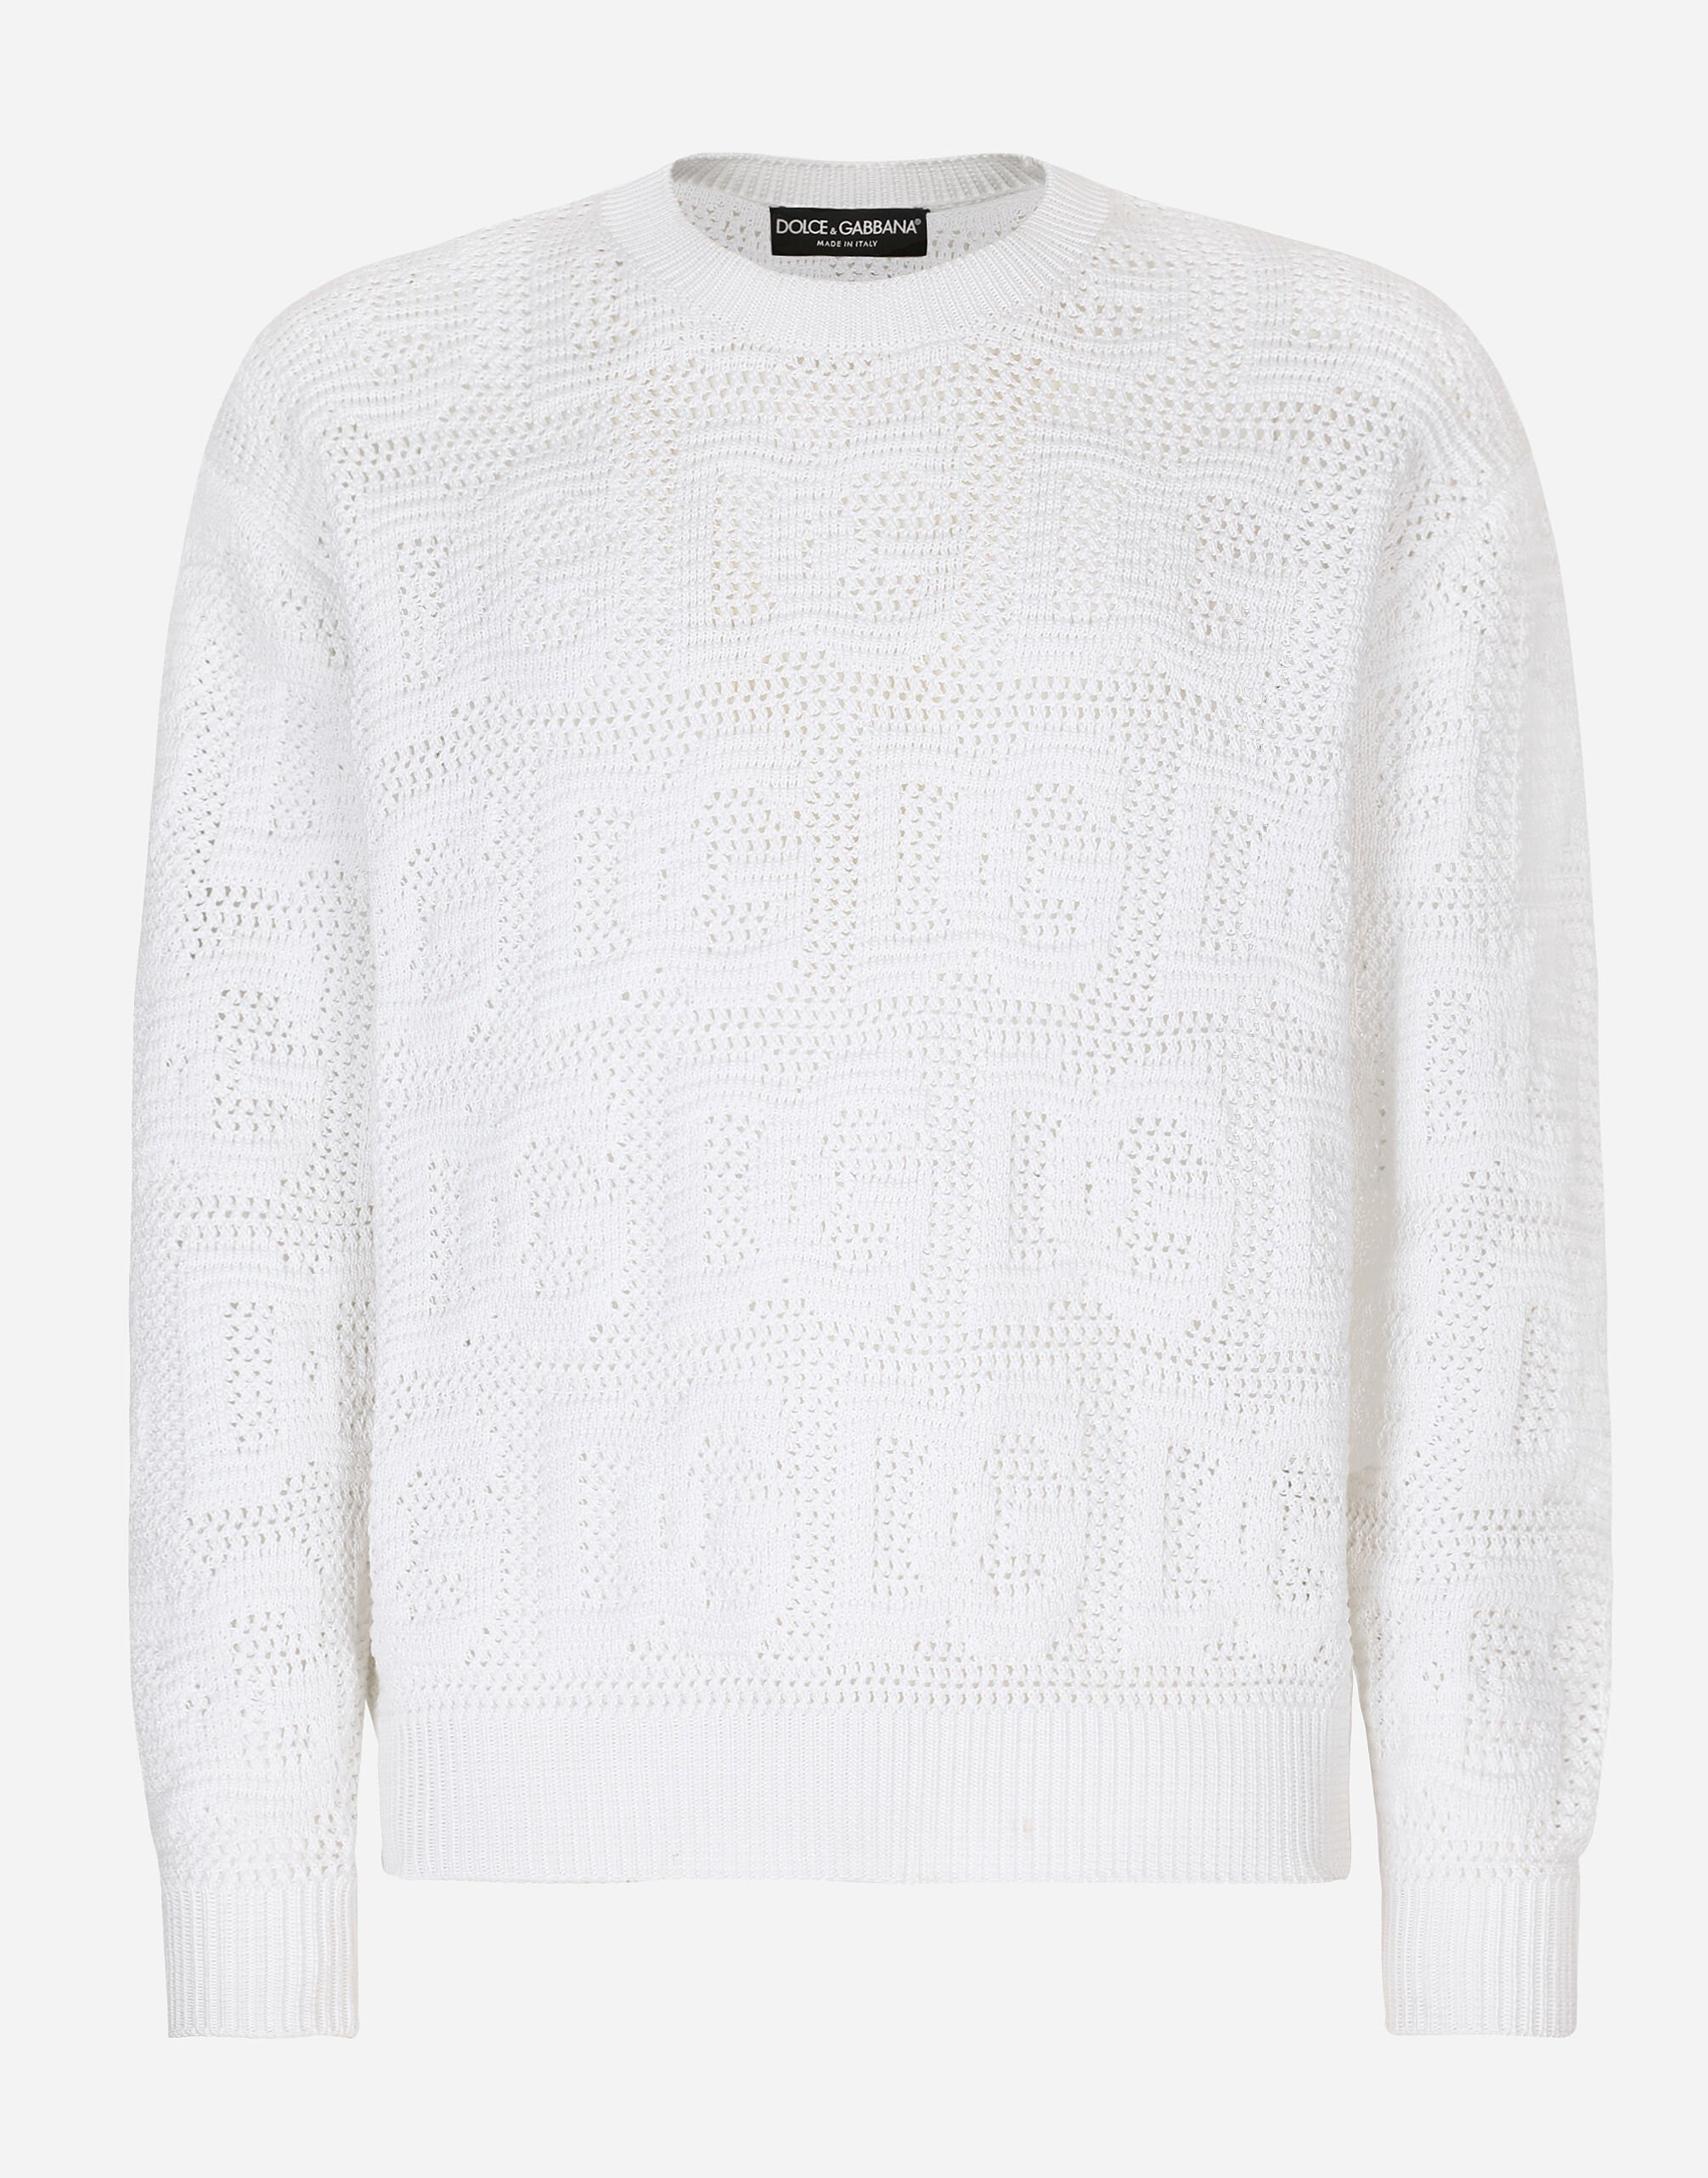 Dolce & Gabbana Cotton jacquard sweater with all-over jacquard DG White GY6UETFUMJN